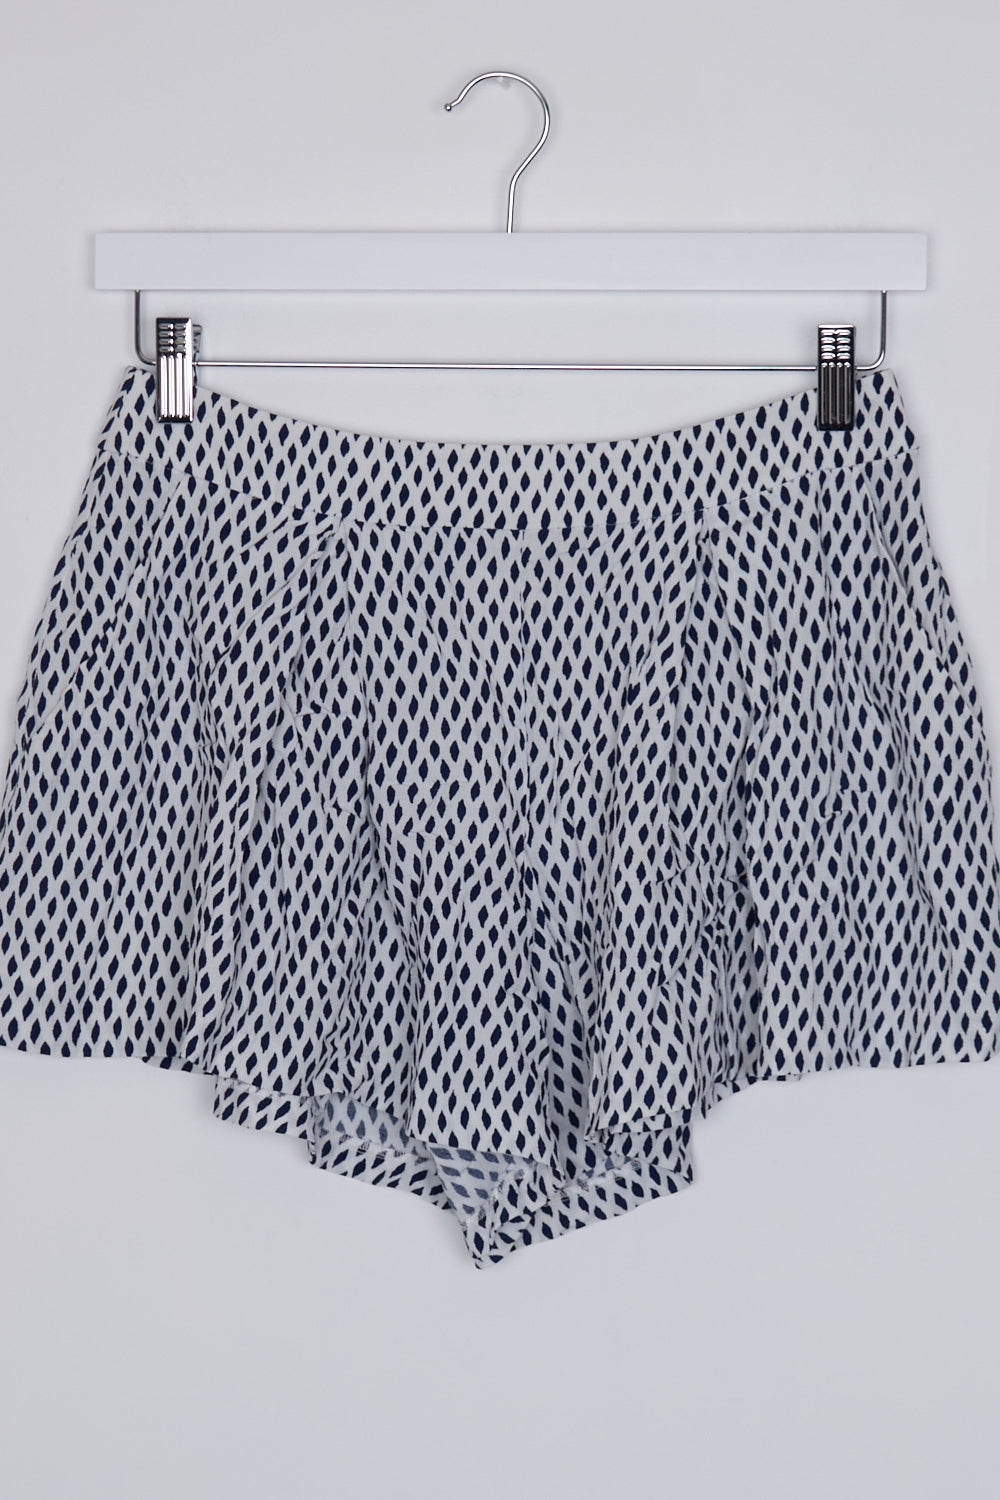 Sass &amp; Bide White And Navy Patterned Pleated Shorts 8